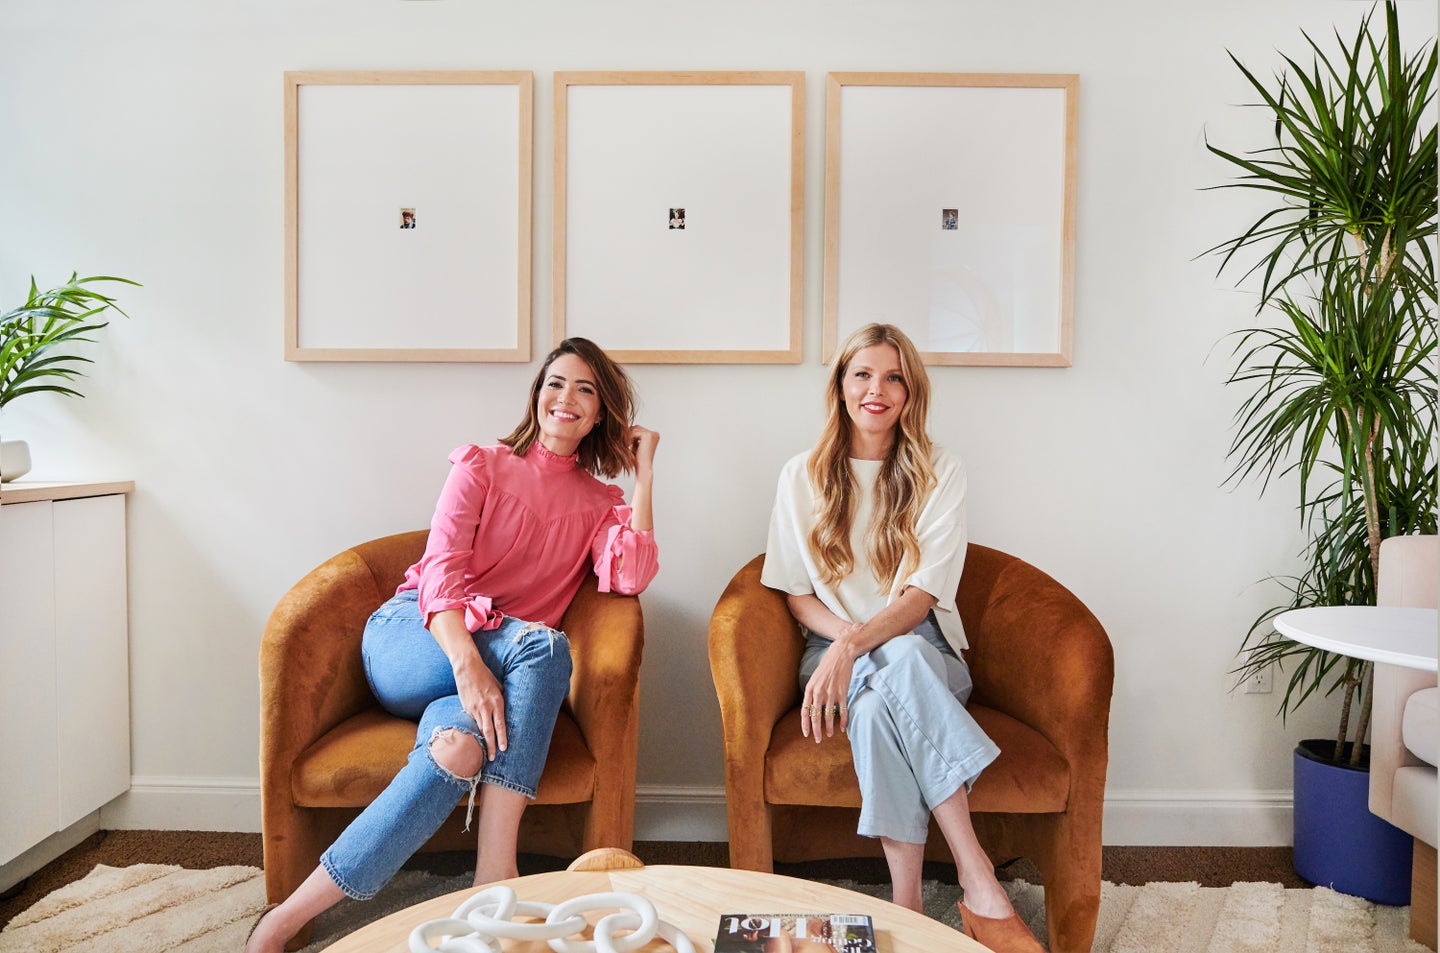 mandy moore and her designer sitting in matching armchairs